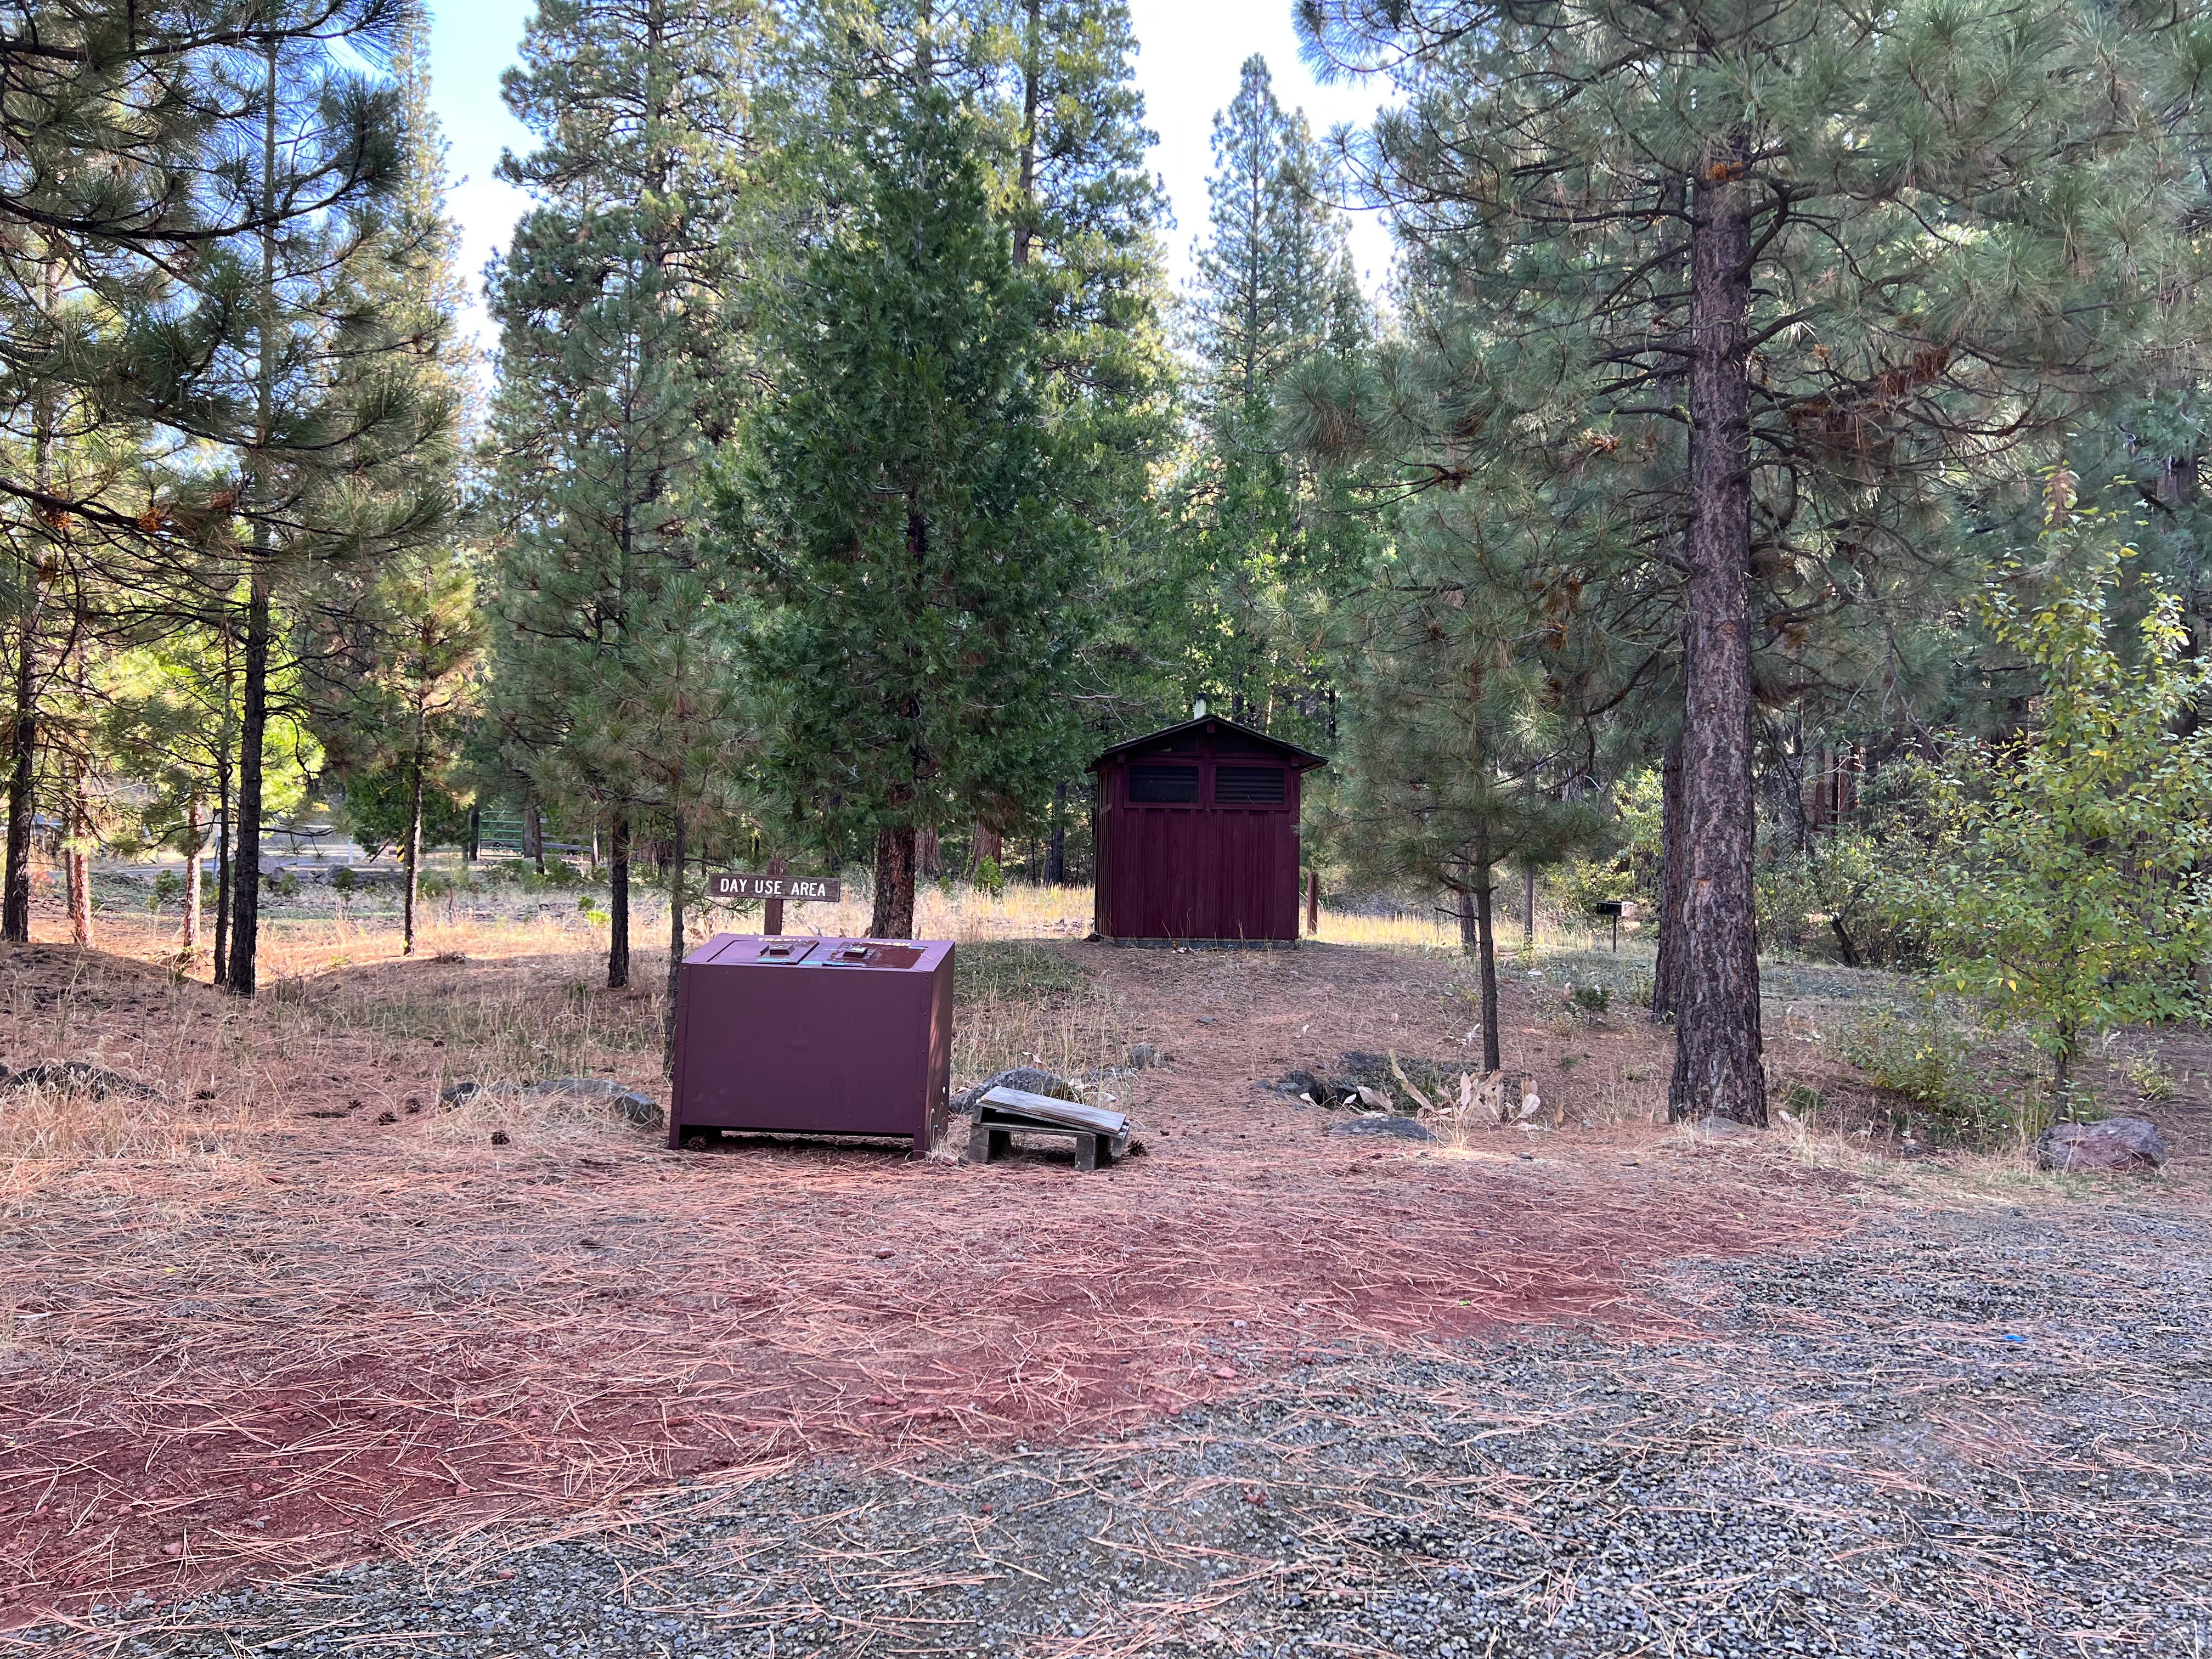 Camper submitted image from Lower Rush Creek Campground - 4